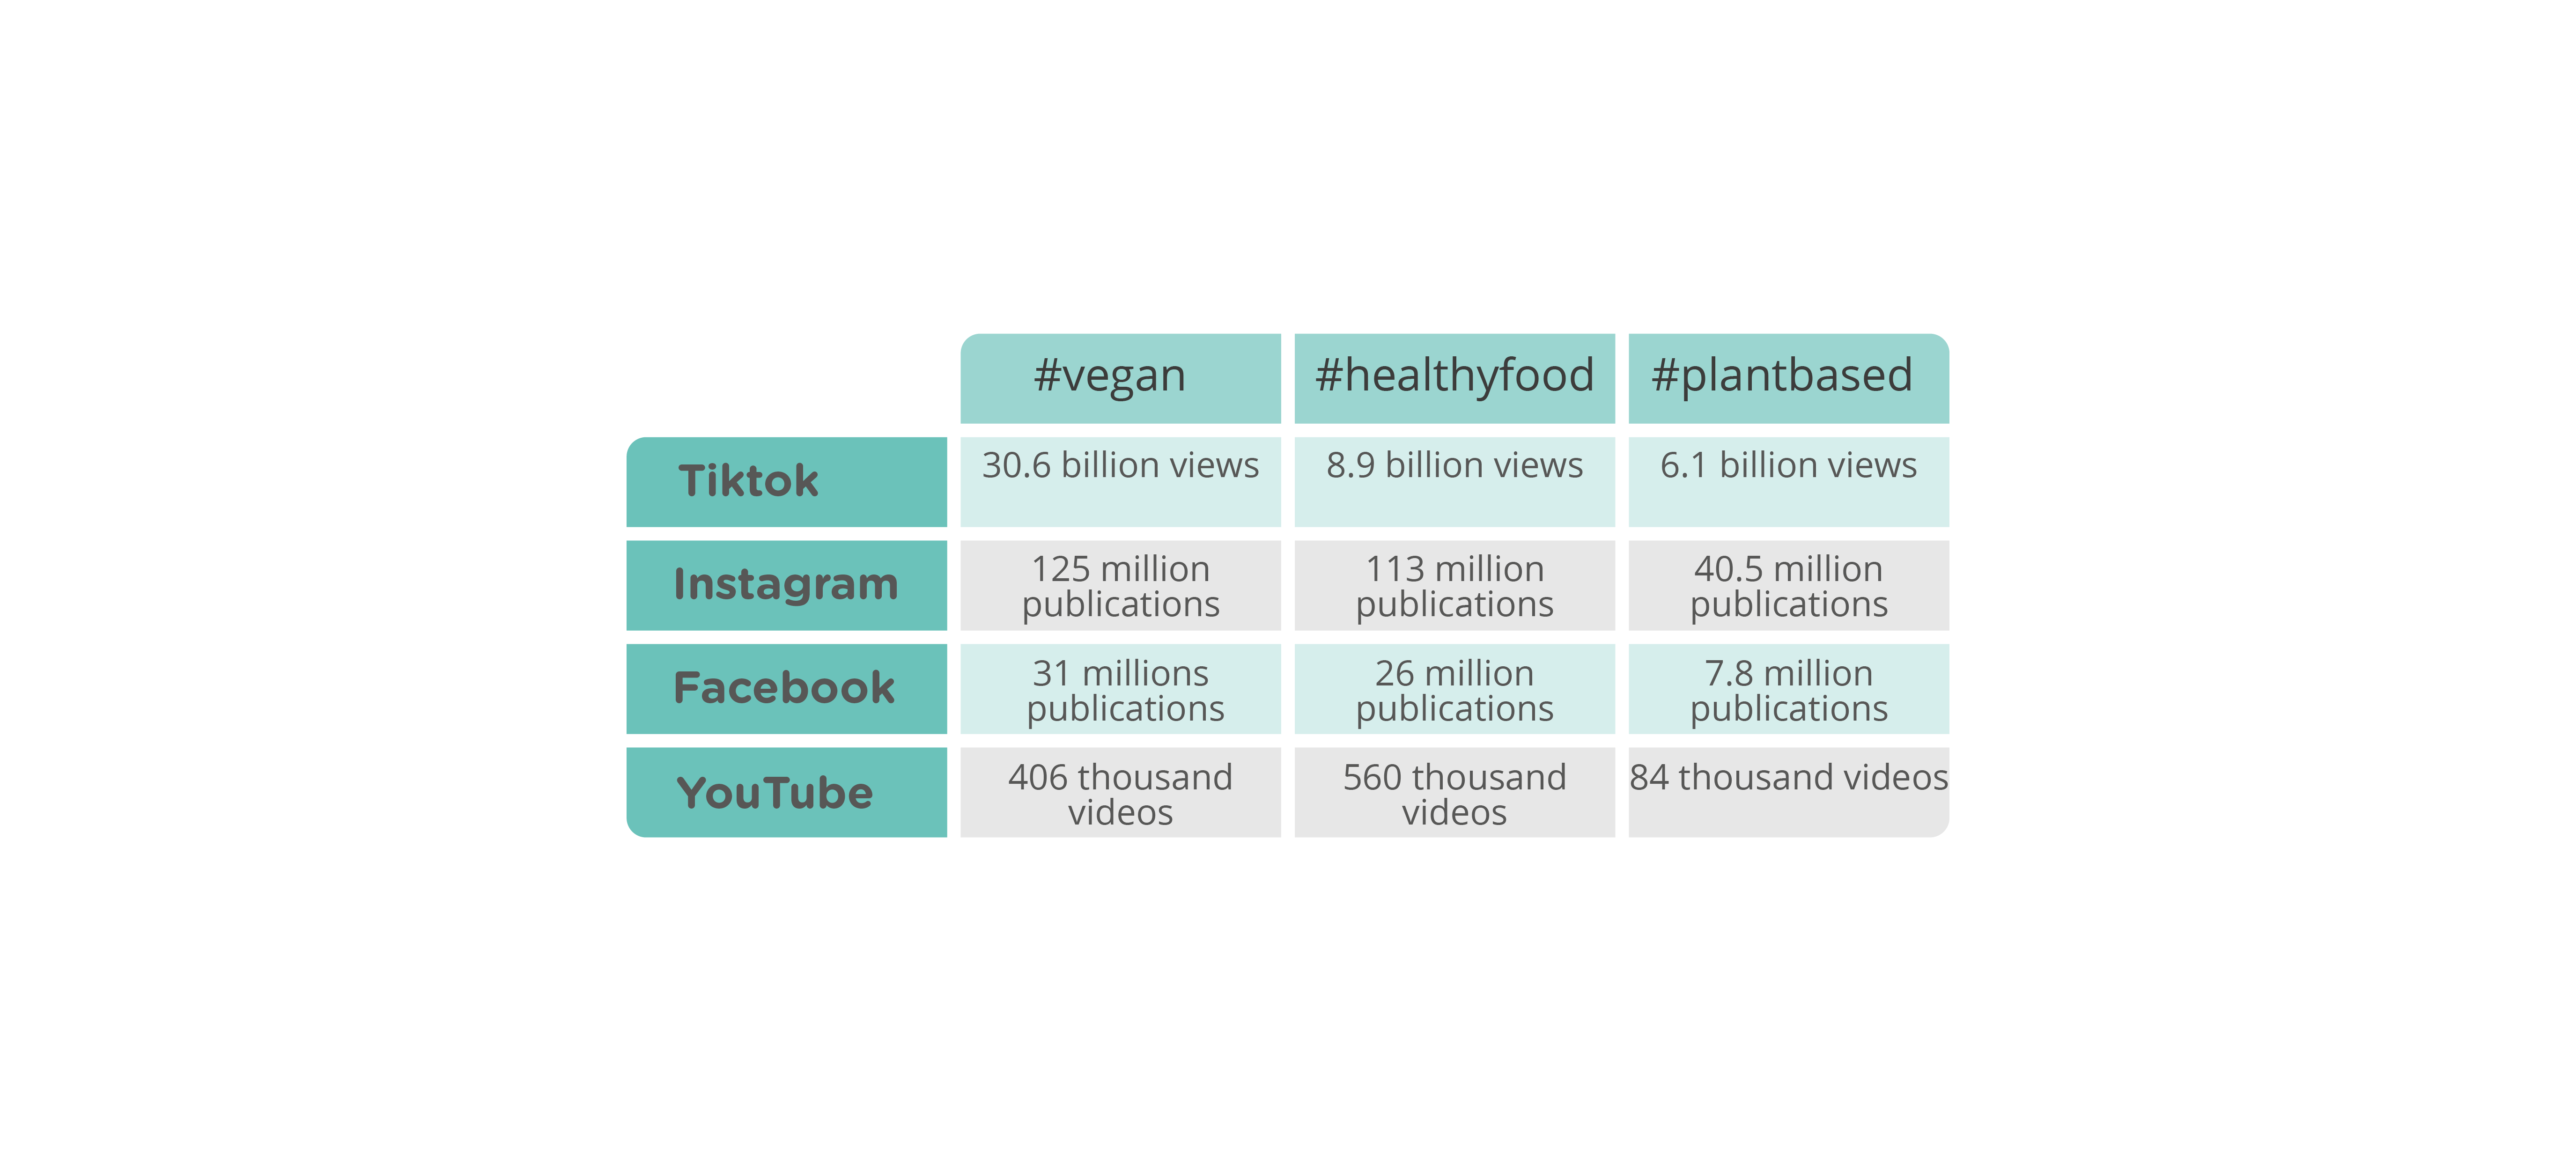 Table showing the number of publications containing the #vegan, #healthyfood and #plantbased hashtags on selected social media platforms